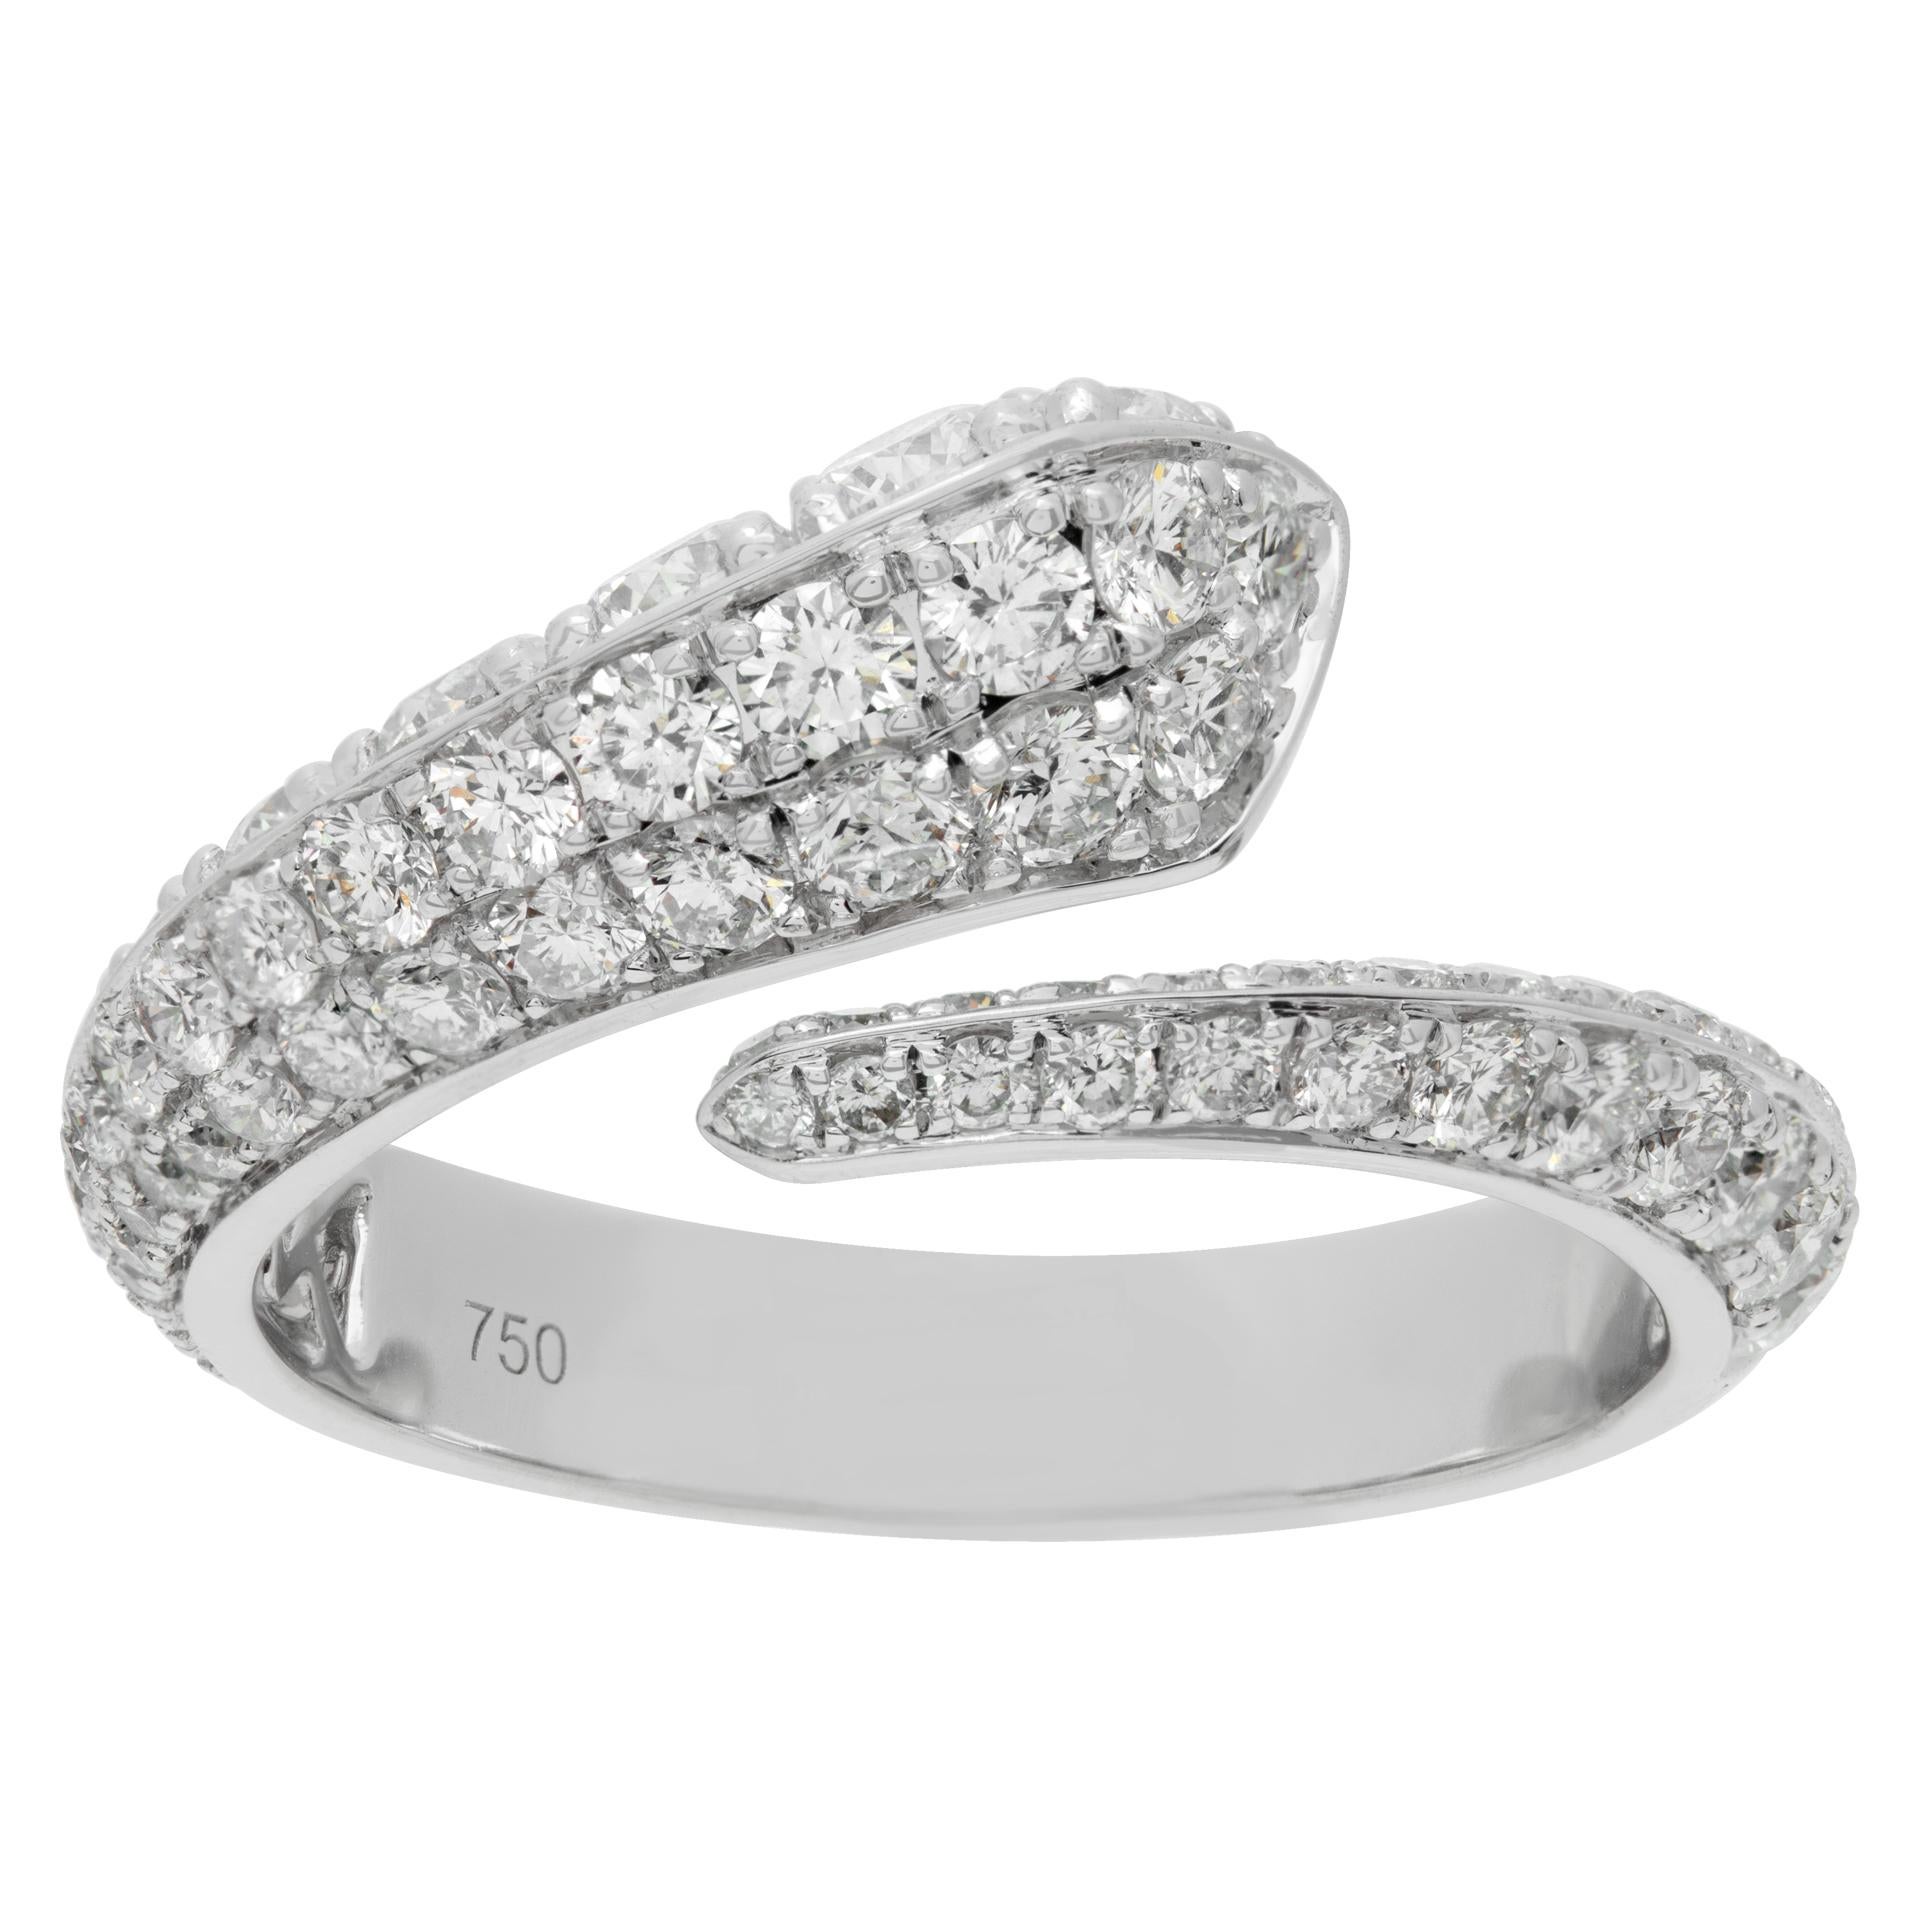 Diamond crossover ring in white gold. Size 6.5